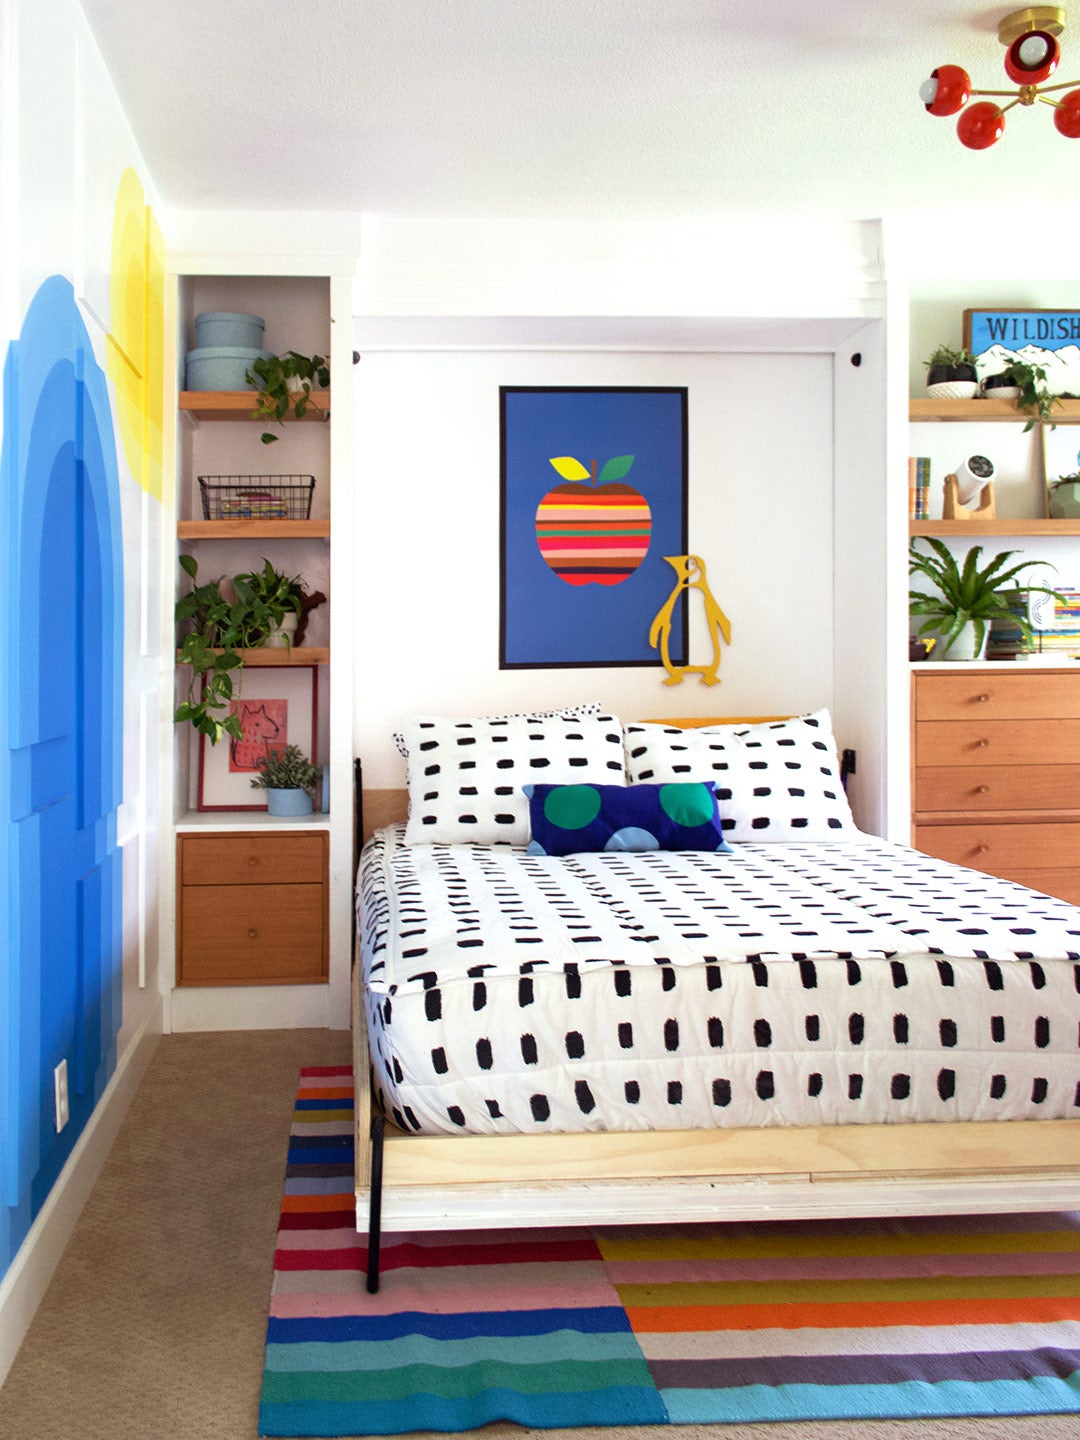 murphy bed next to blue and yellow wall mural